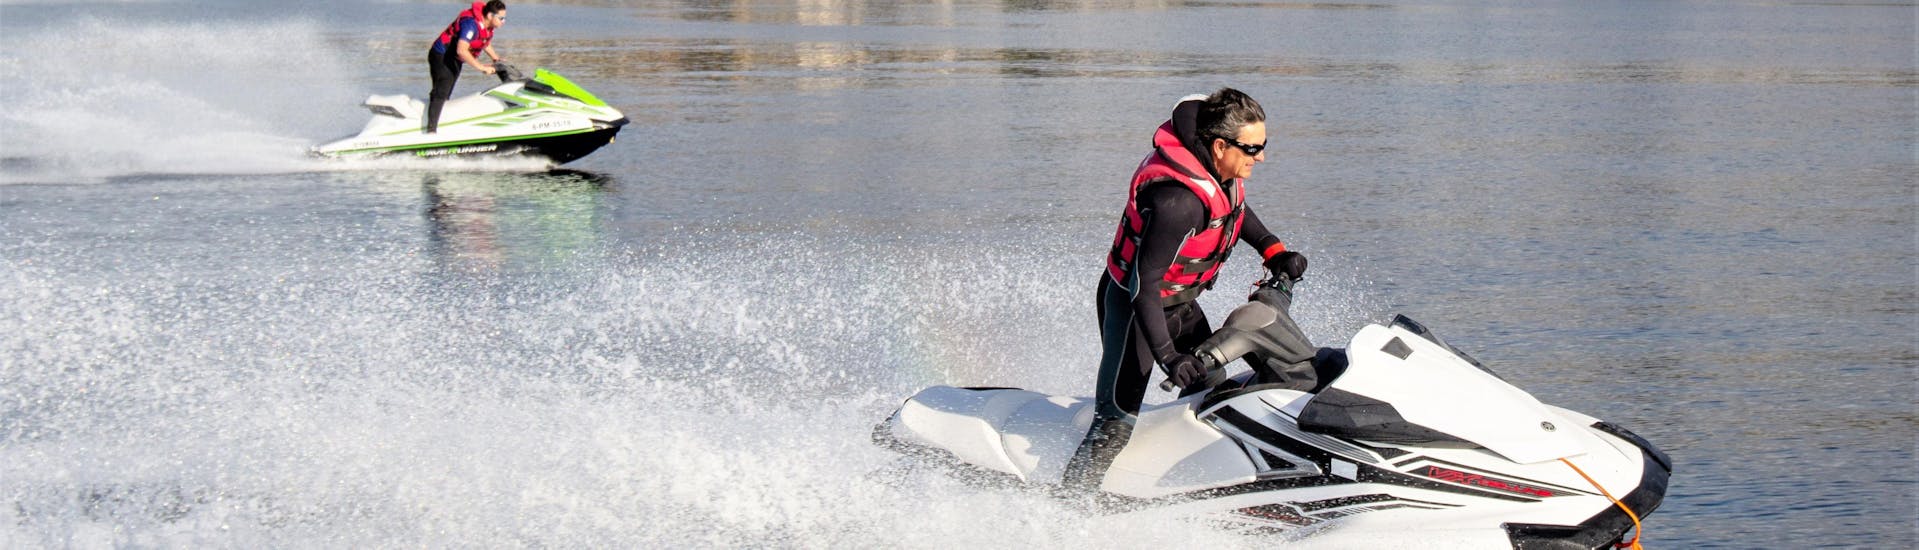 Two persons on their jet skis during the Jet Ski Safari to Alcúdia Beach with Alcudiajets.